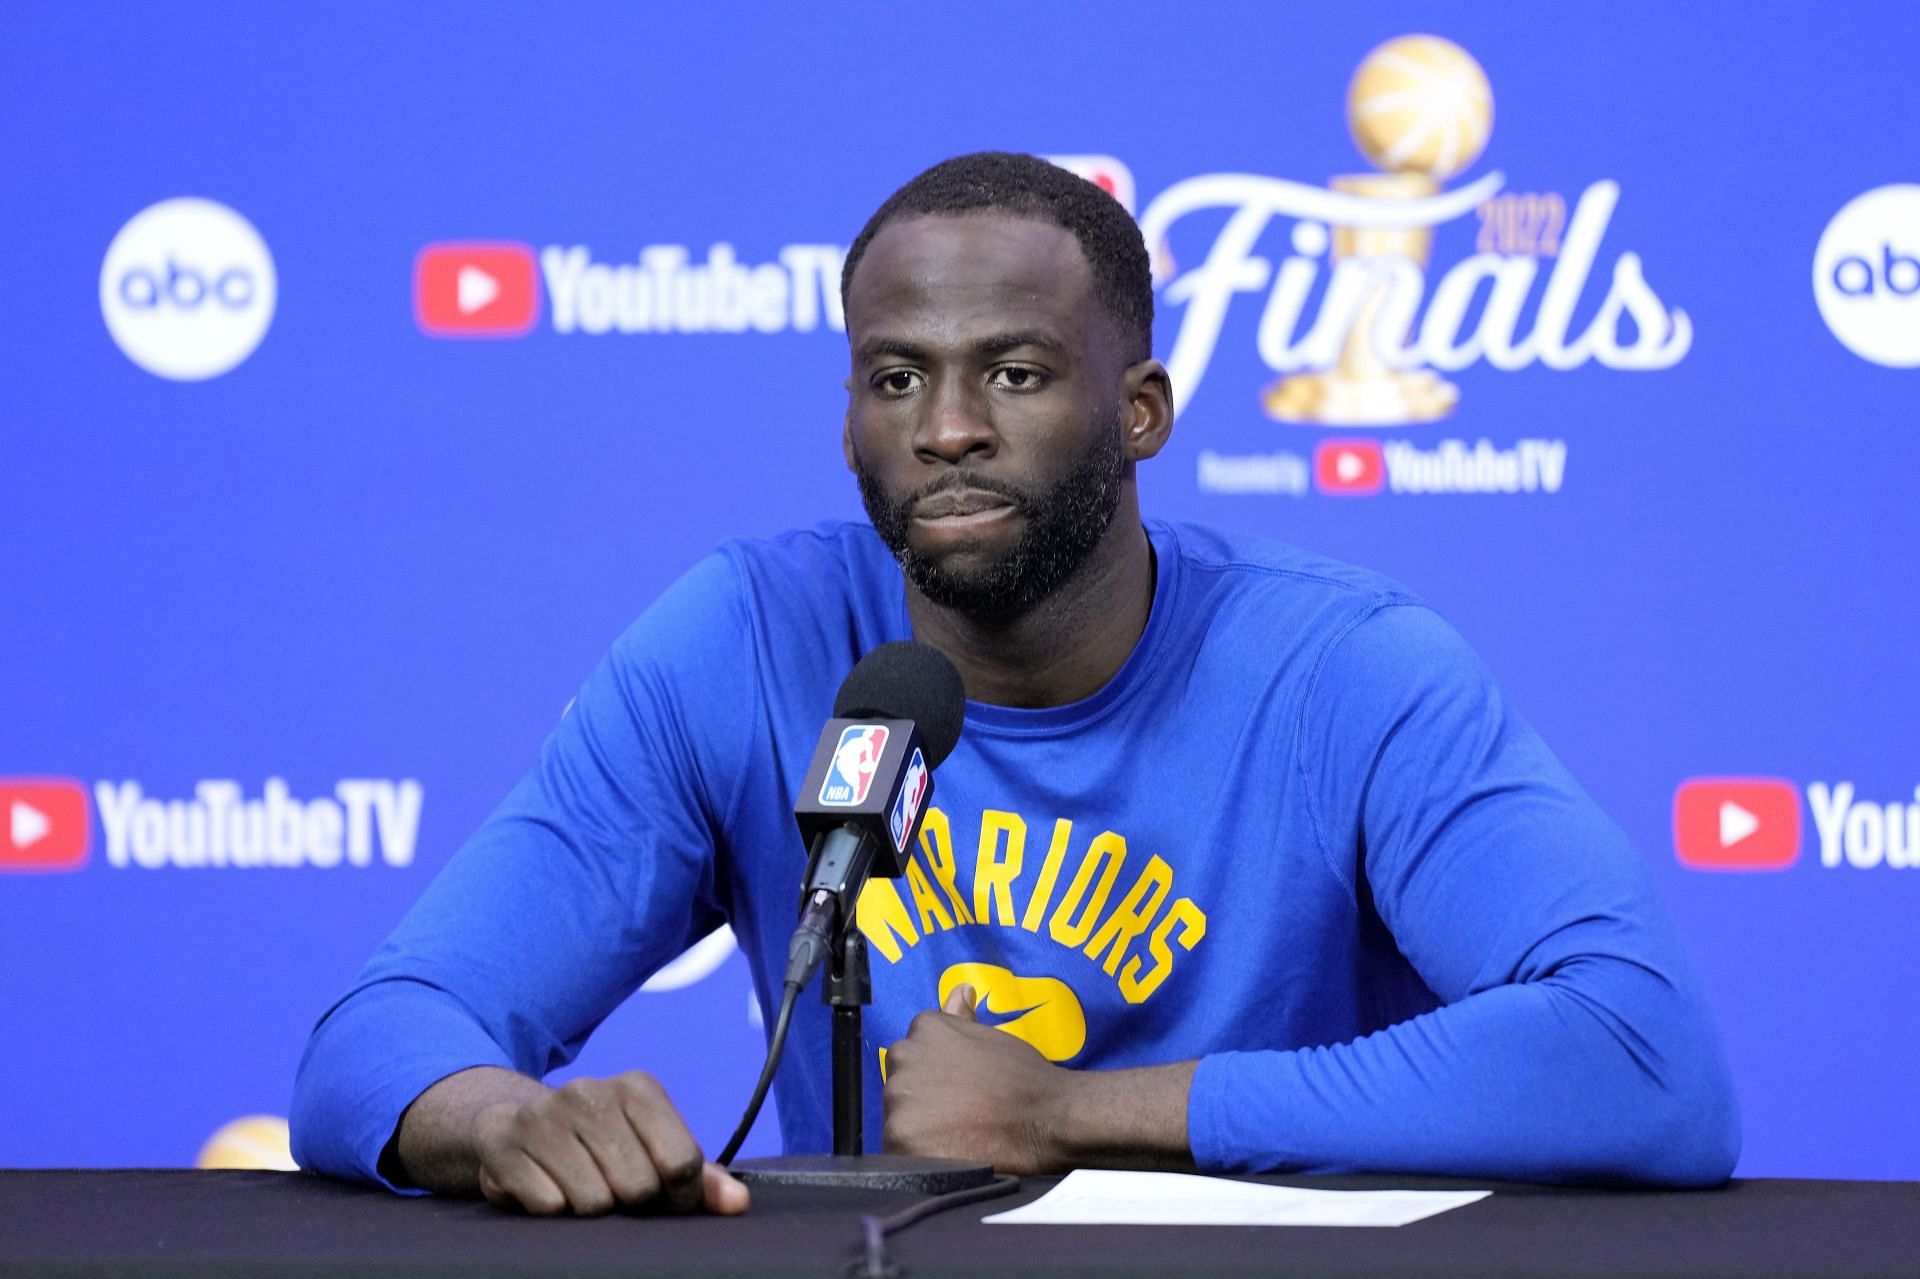 Draymond Green will be looking to bounce back strongly after a poor Game 3 performance.